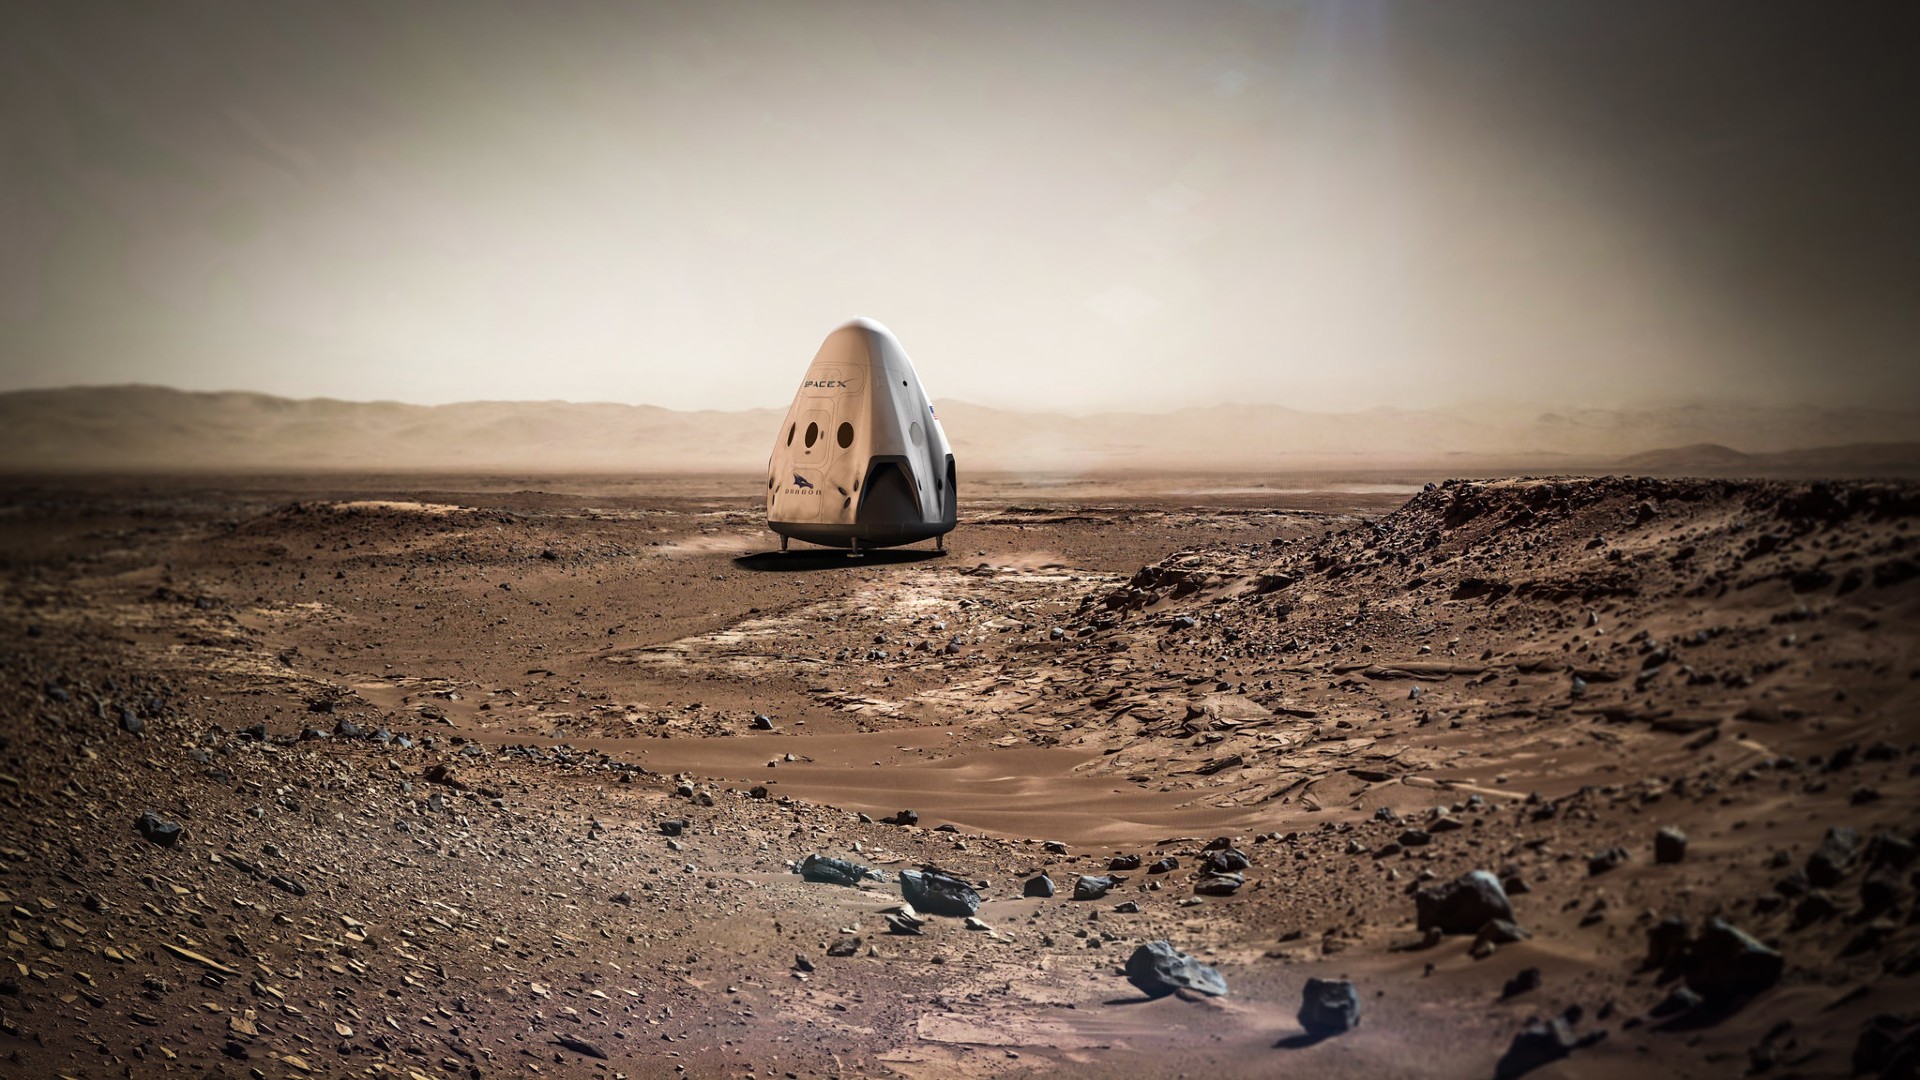 Illustration of the SpaceX Dragon capsule landing on Mars.